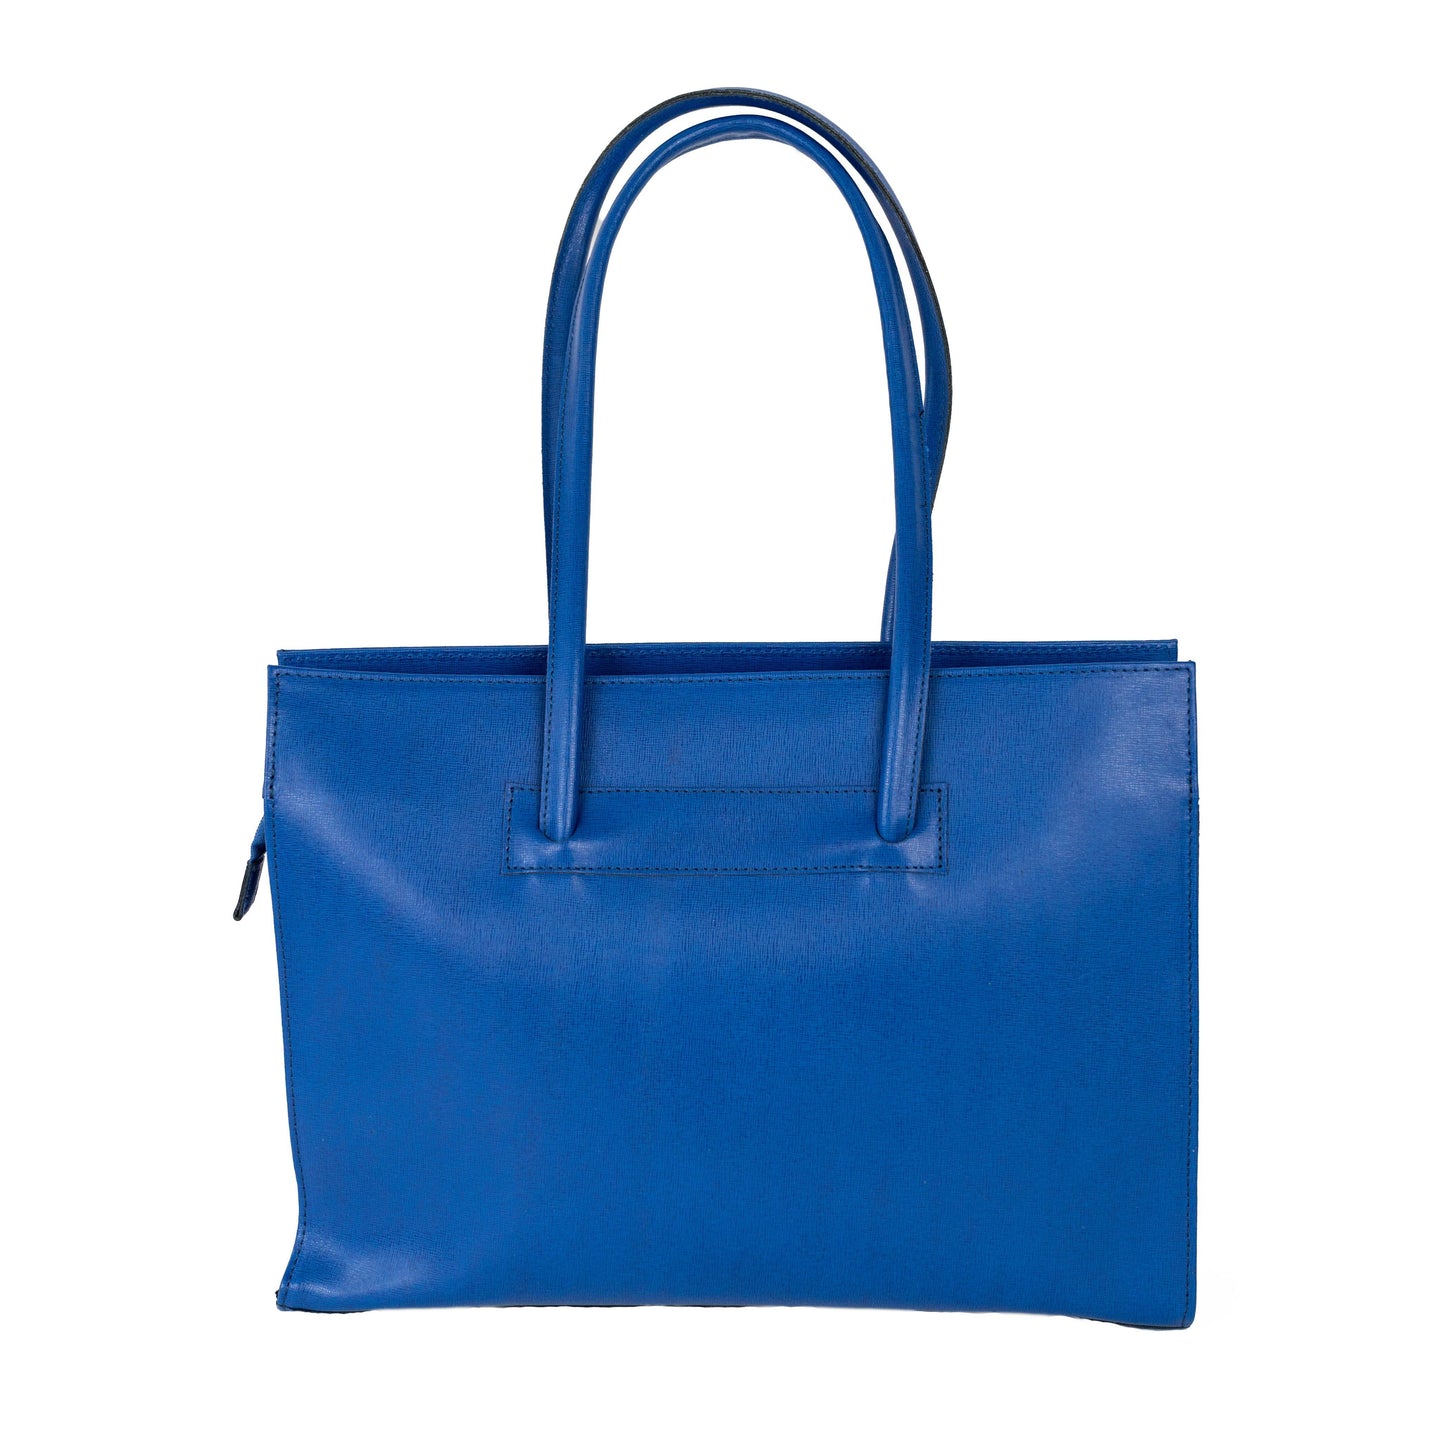 Angelica Genuine leather Hand Bags. Solid Colors. Hand made in Italy - Painted Hills Souvenirs